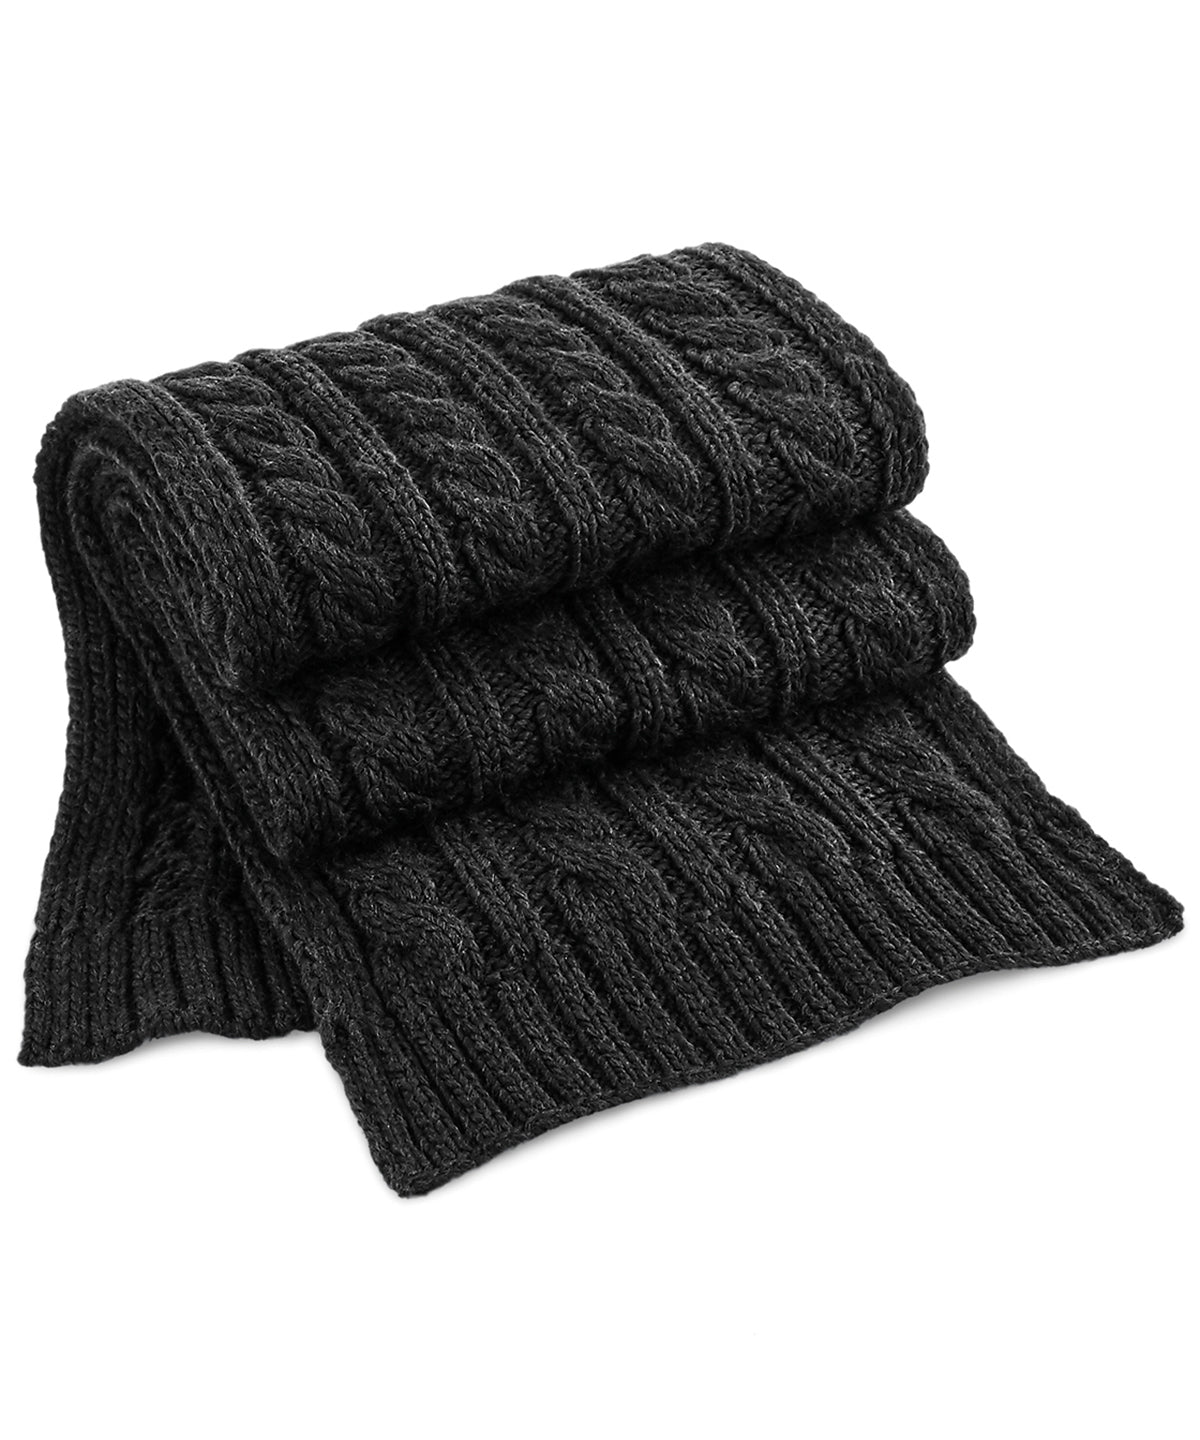 Personalised Scarves - Black Beechfield Cable knit melange scarf